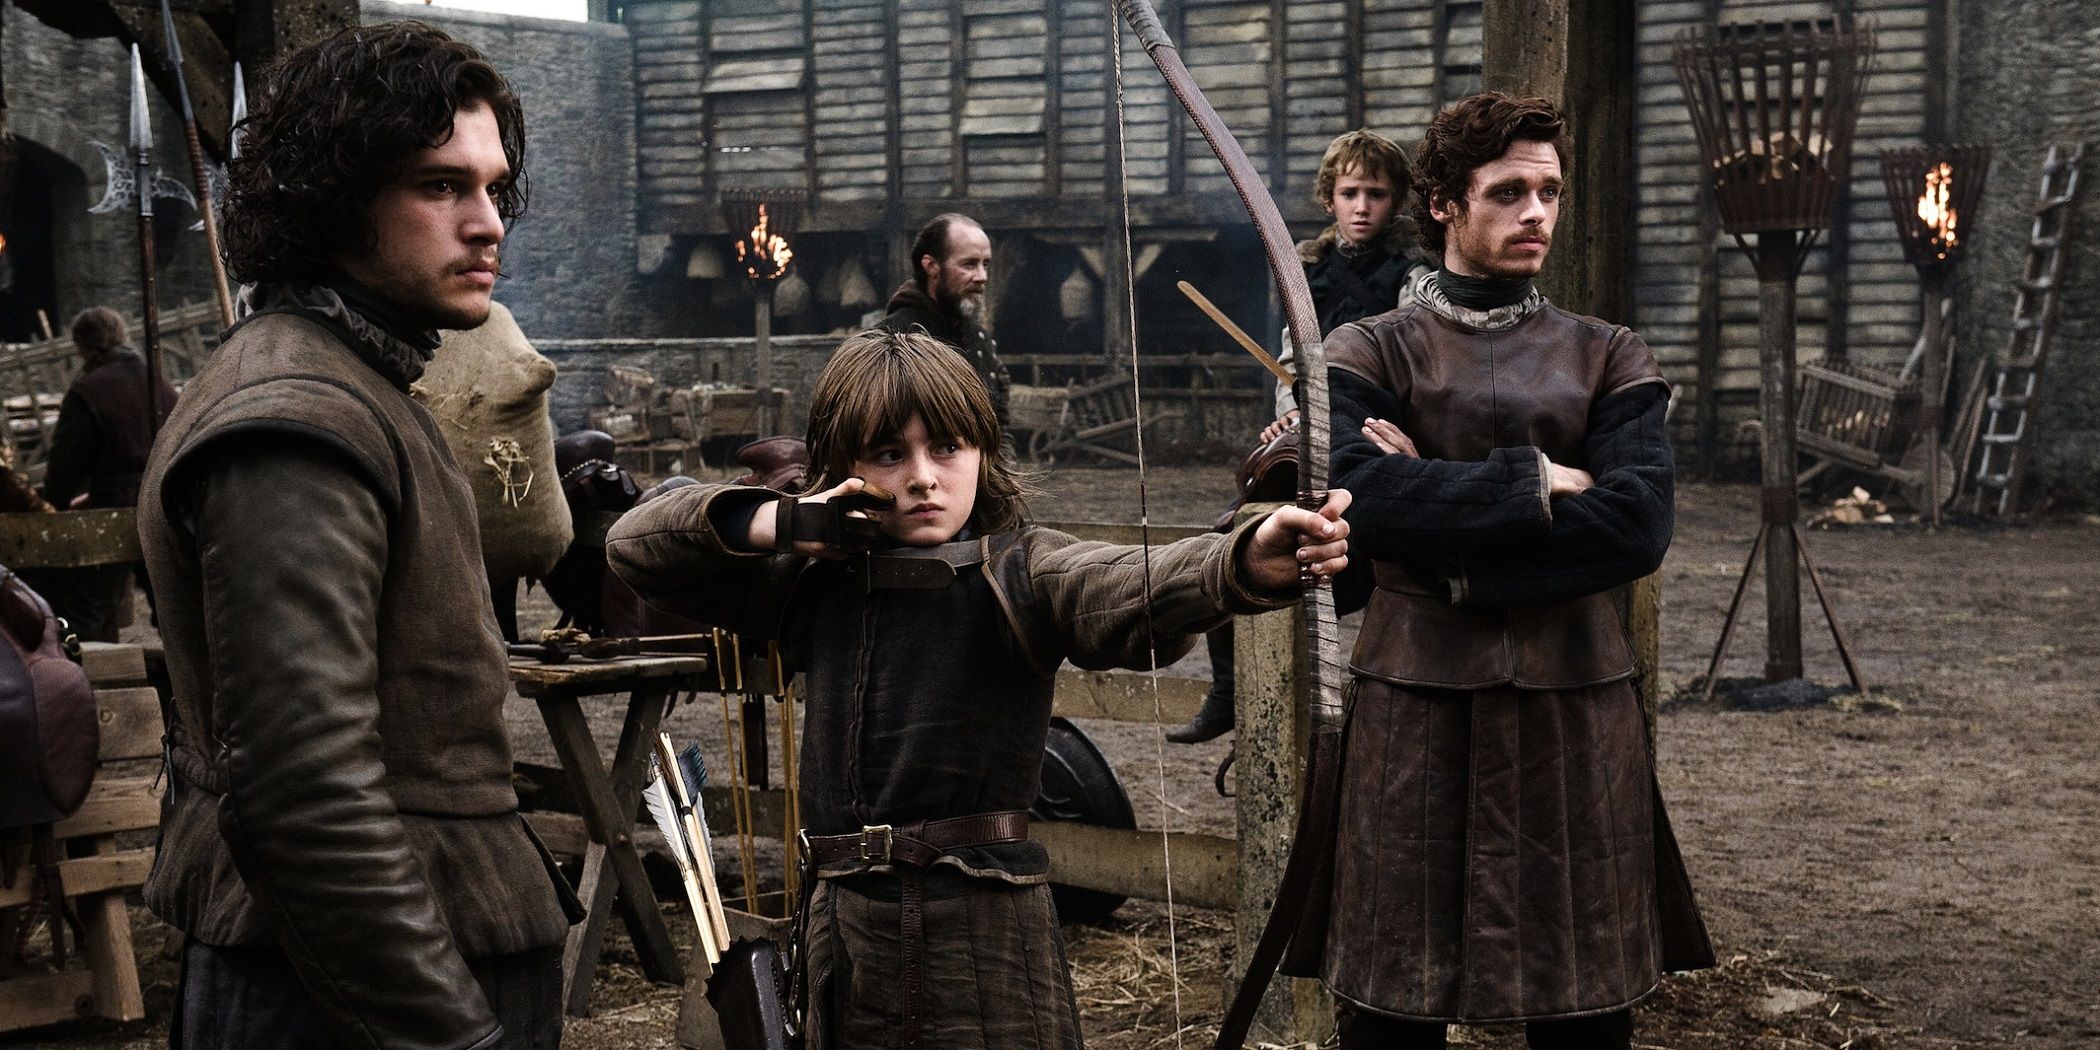 The Stark brothers in Game of Thrones